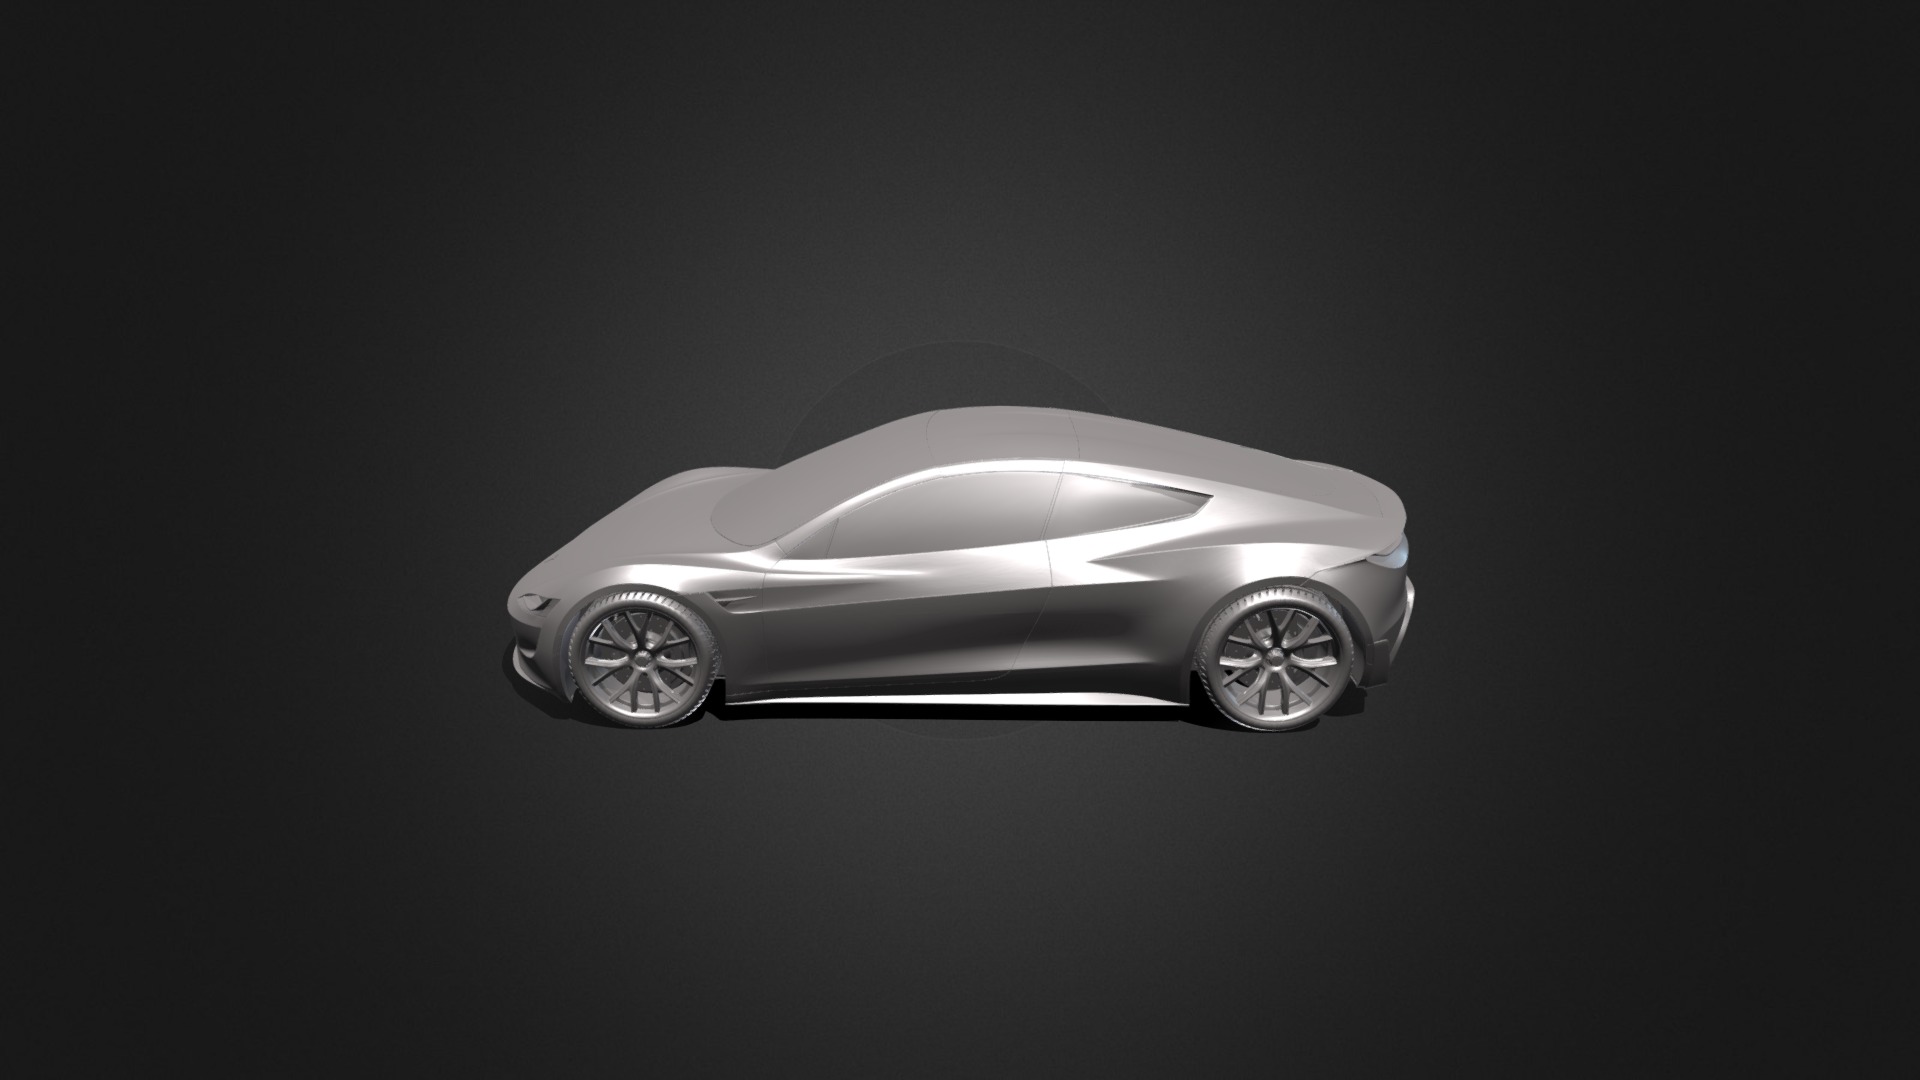 3D model TESLA ROADSTER 2020 3D PRINTABLE MODEL - This is a 3D model of the TESLA ROADSTER 2020 3D PRINTABLE MODEL. The 3D model is about a silver car with a black background.